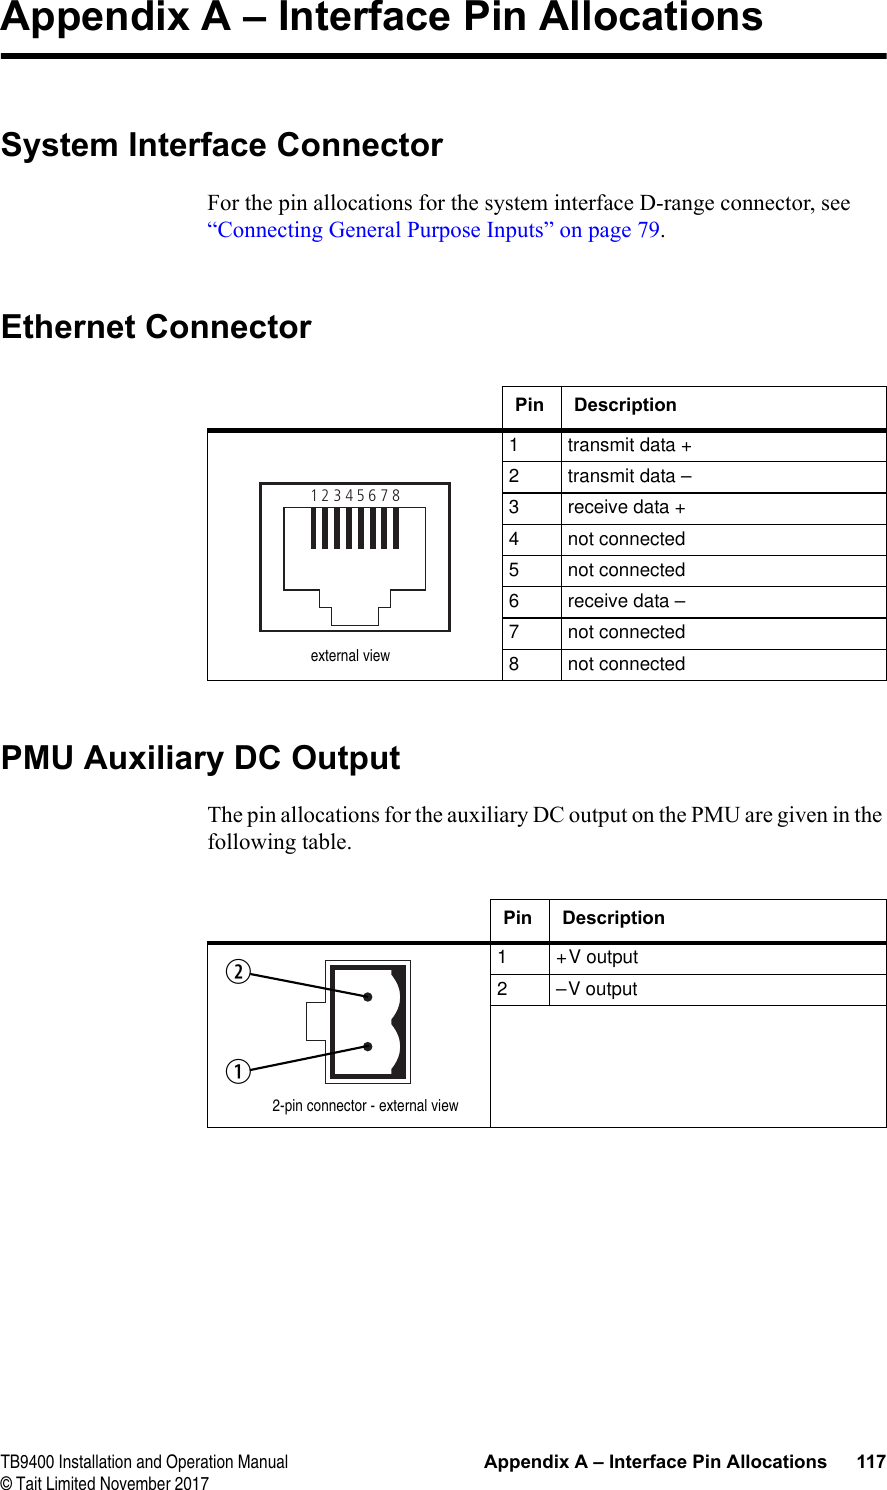  TB9400 Installation and Operation Manual Appendix A – Interface Pin Allocations 117© Tait Limited November 2017Appendix A – Interface Pin AllocationsSystem Interface ConnectorFor the pin allocations for the system interface D-range connector, see “Connecting General Purpose Inputs” on page 79.Ethernet ConnectorPMU Auxiliary DC OutputThe pin allocations for the auxiliary DC output on the PMU are given in the following table.Pin Description1 transmit data +2 transmit data –3 receive data +4 not connected5 not connected6 receive data –7 not connected8 not connected12345678external viewPin Description1 +V output2 –V output2-pin connector - external viewbc